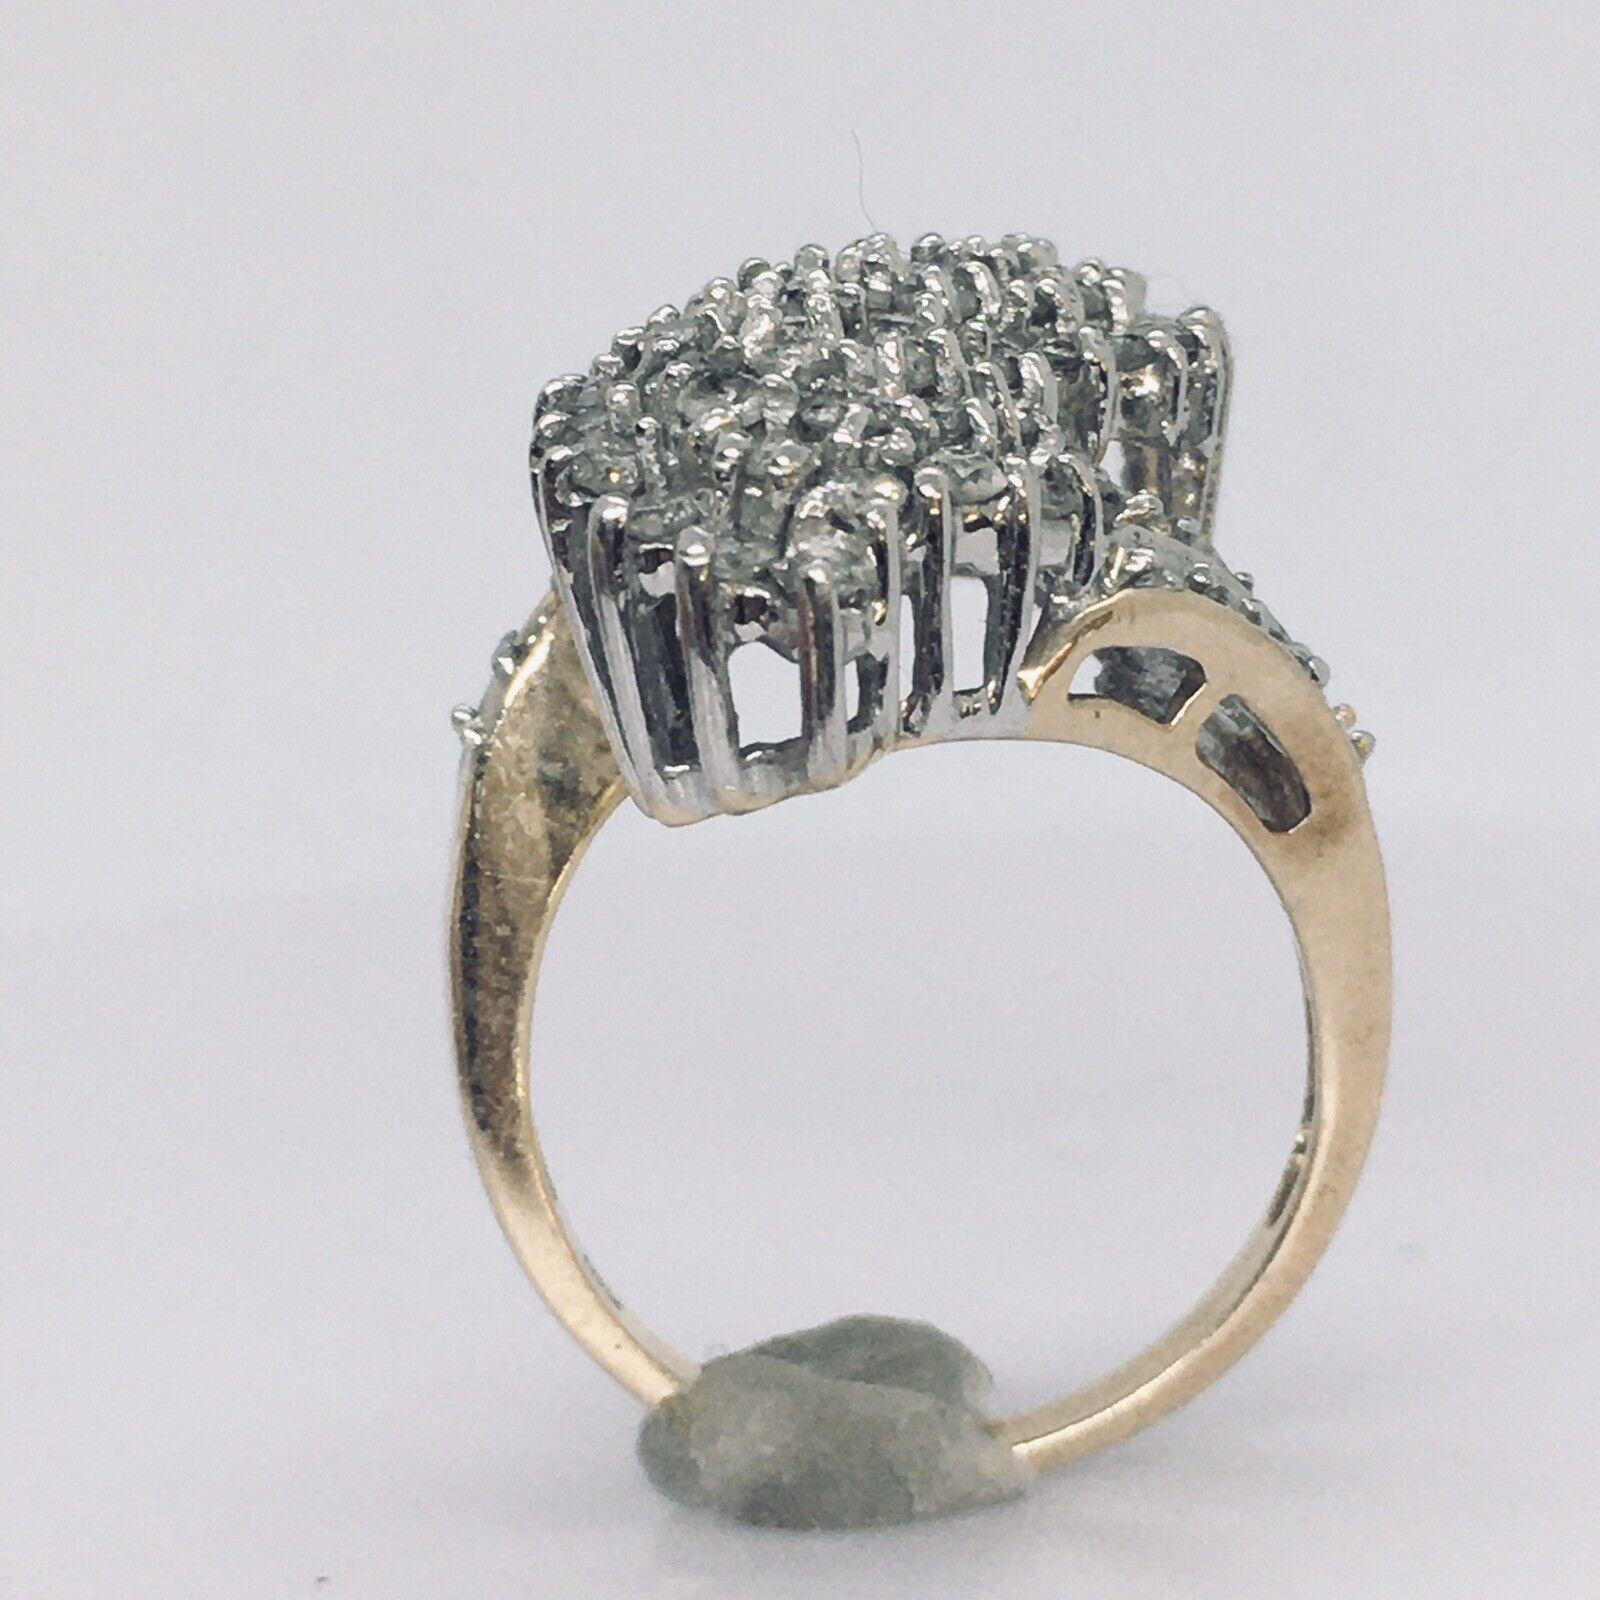 
10K Yellow & white Gold 2.35 Carat of Natural Diamond Cluster ring

Hard to estimate the total diamond weight but after several calculations I come up with 2.35


I see 90 larger round diamonds and 10 smaller round diamonds total 100 pieces